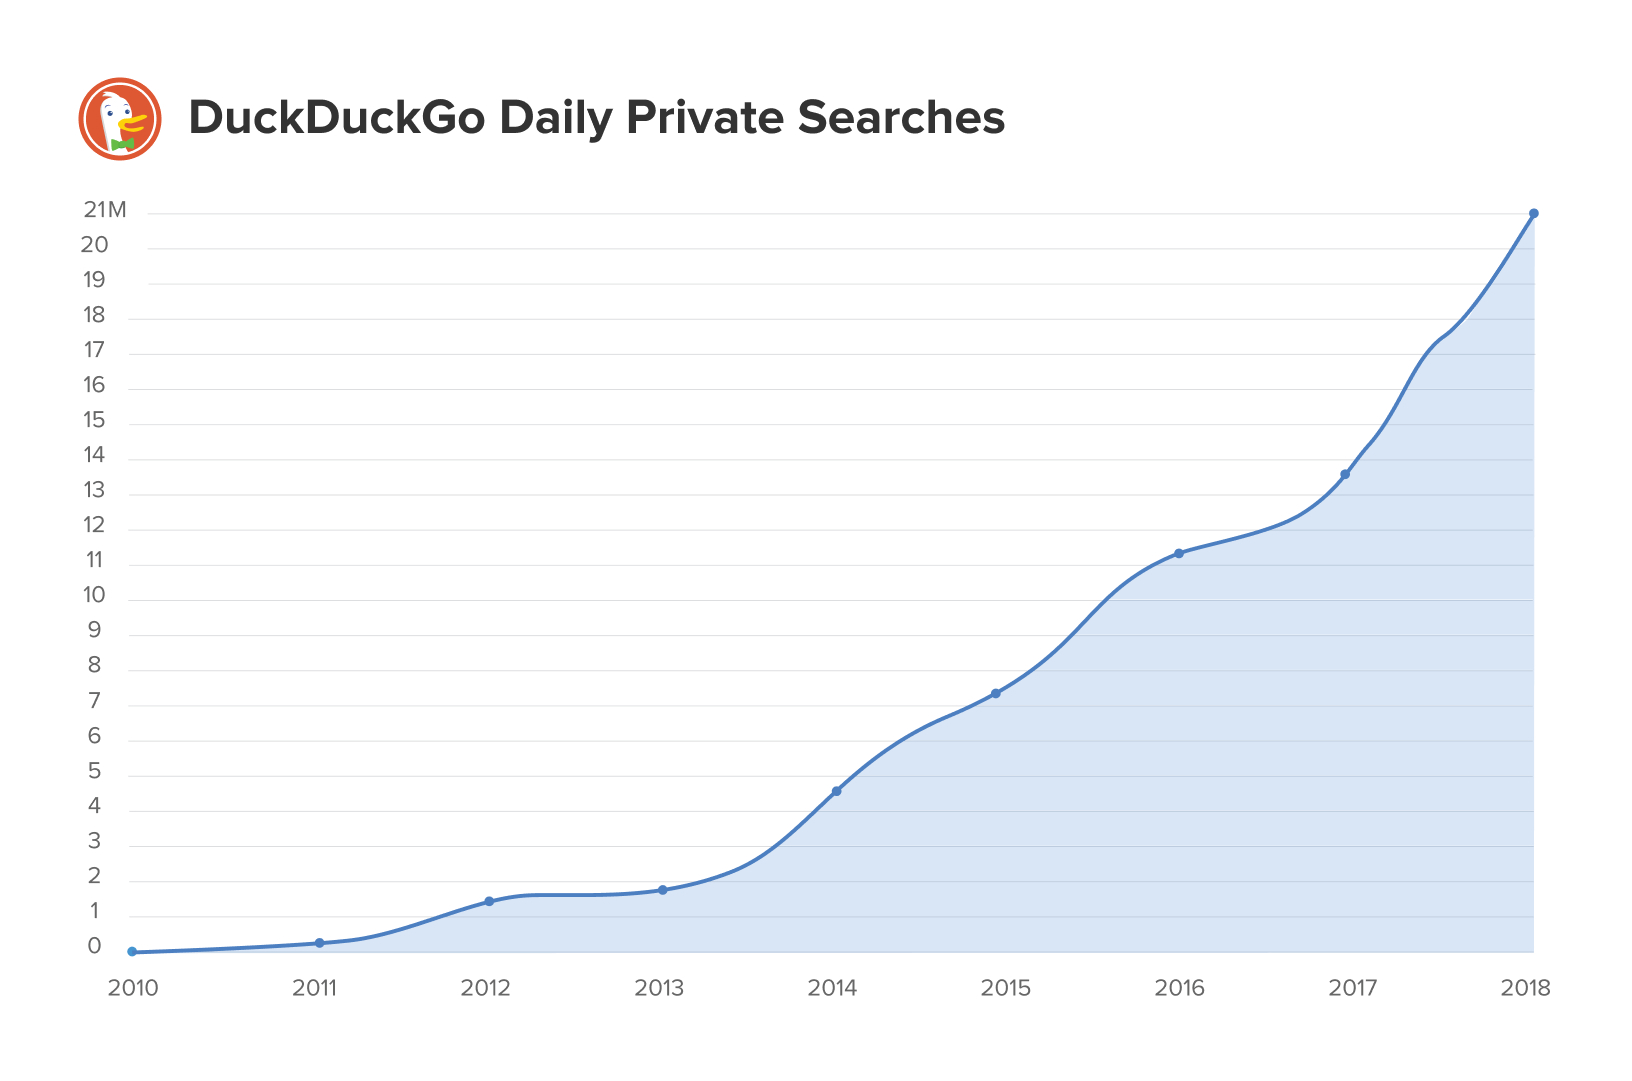 A chart showing the rapid increase of popularity of DuckDuckGo.com